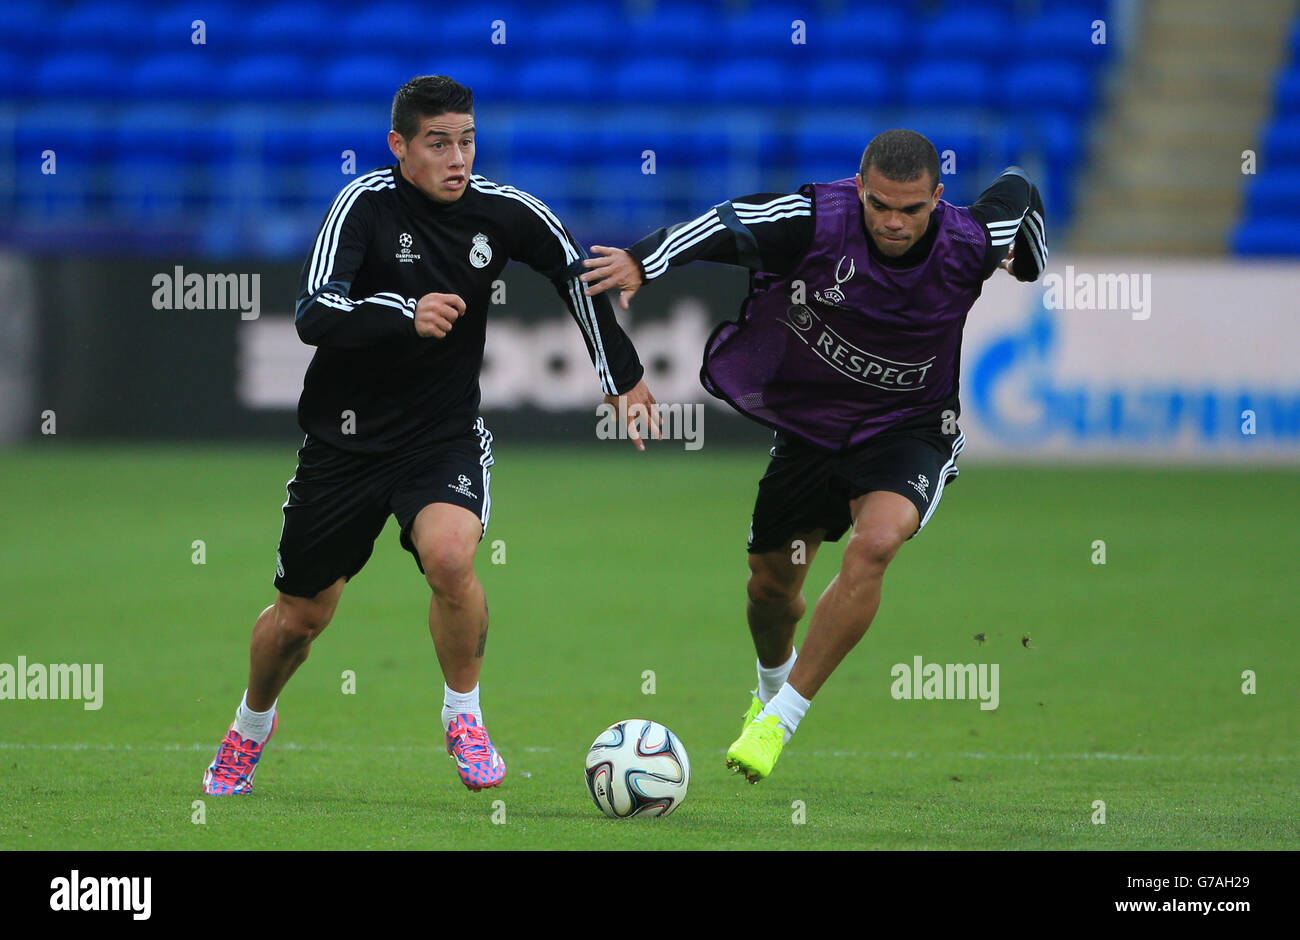 Soccer - 2014 UEFA Super Cup - Sevilla v Real Madrid - Real Madrid Training - Cardiff City Stadium. Real Madrid's James Rodriguez tussles for the ball with Pepe during training at the Cardiff City Stadium, Cardiff. Stock Photo